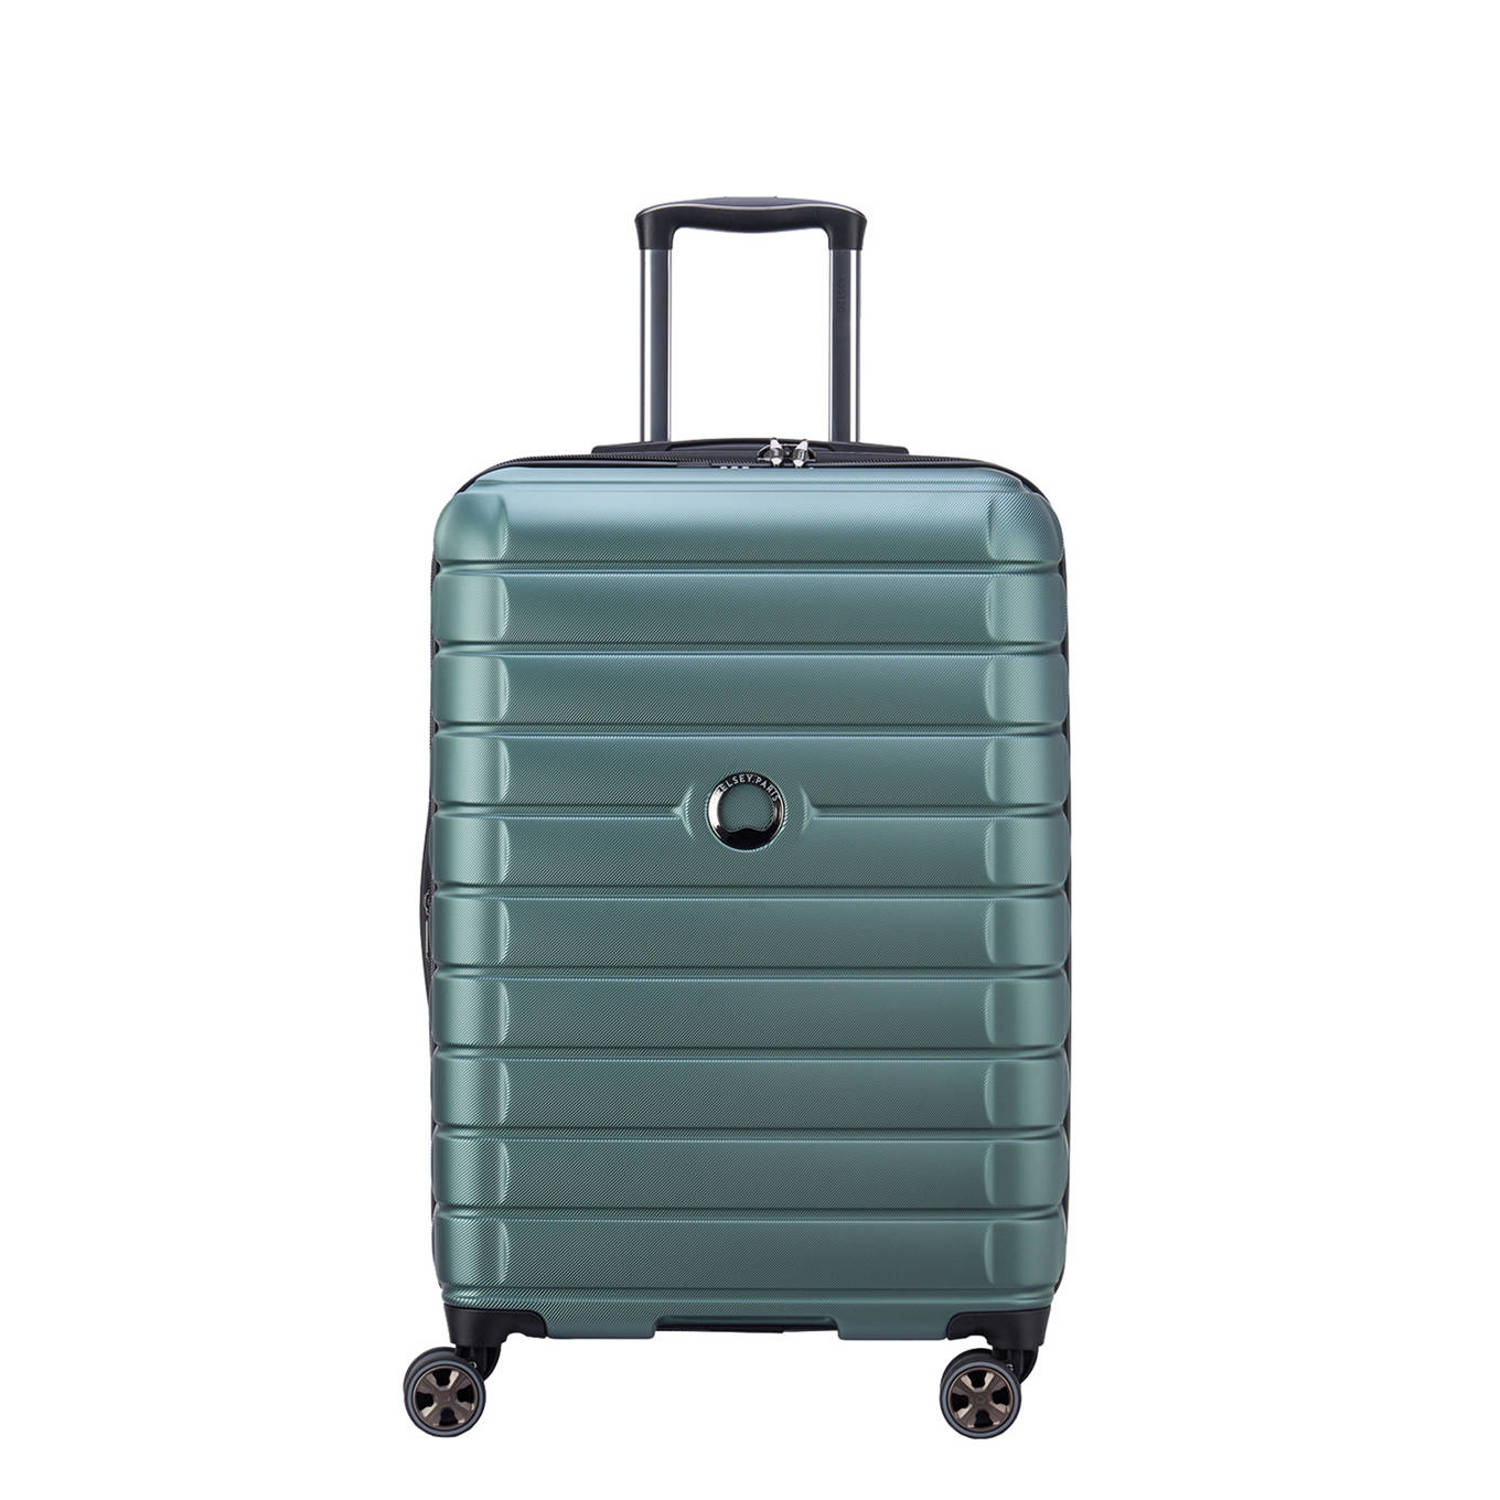 Delsey trolley Shadow 5.0 66 cm. Expandable groen